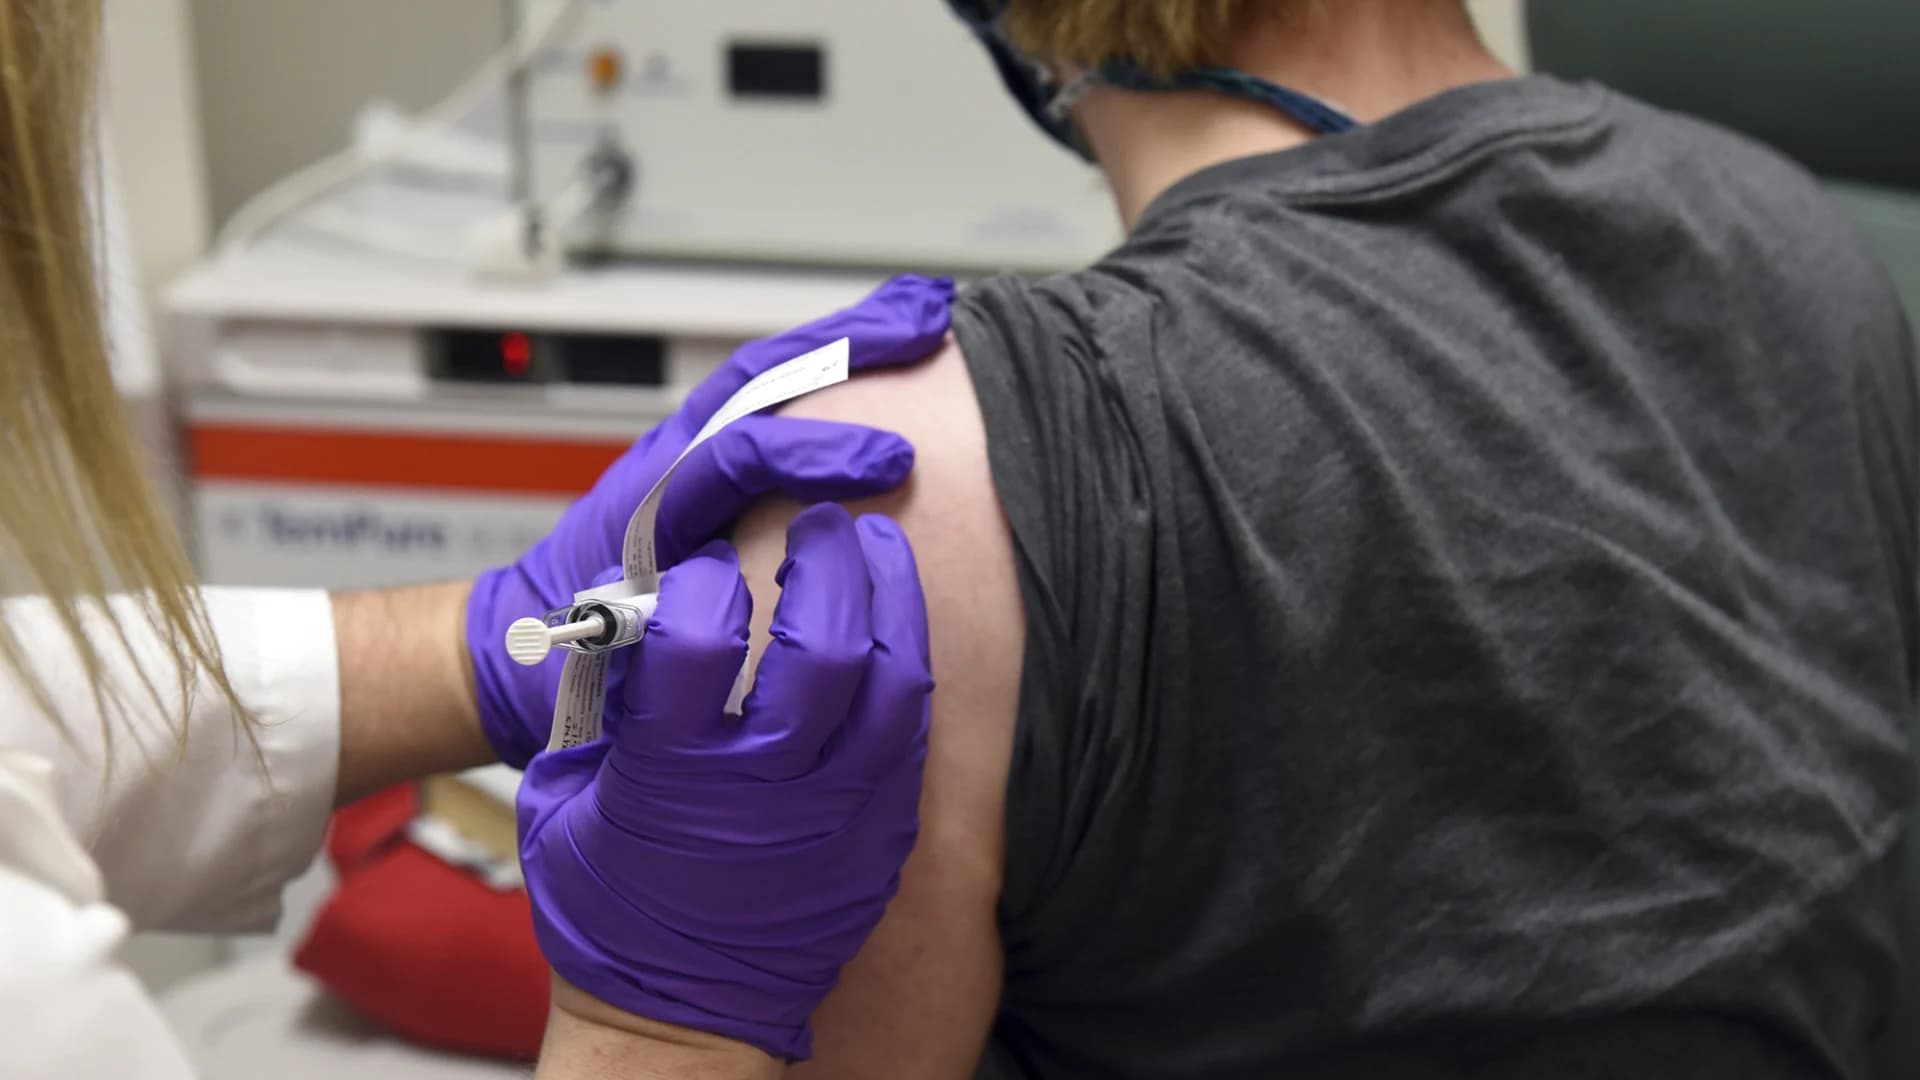 First US immunizations could arrive Dec. 12, chief of Operation Warp Speed says